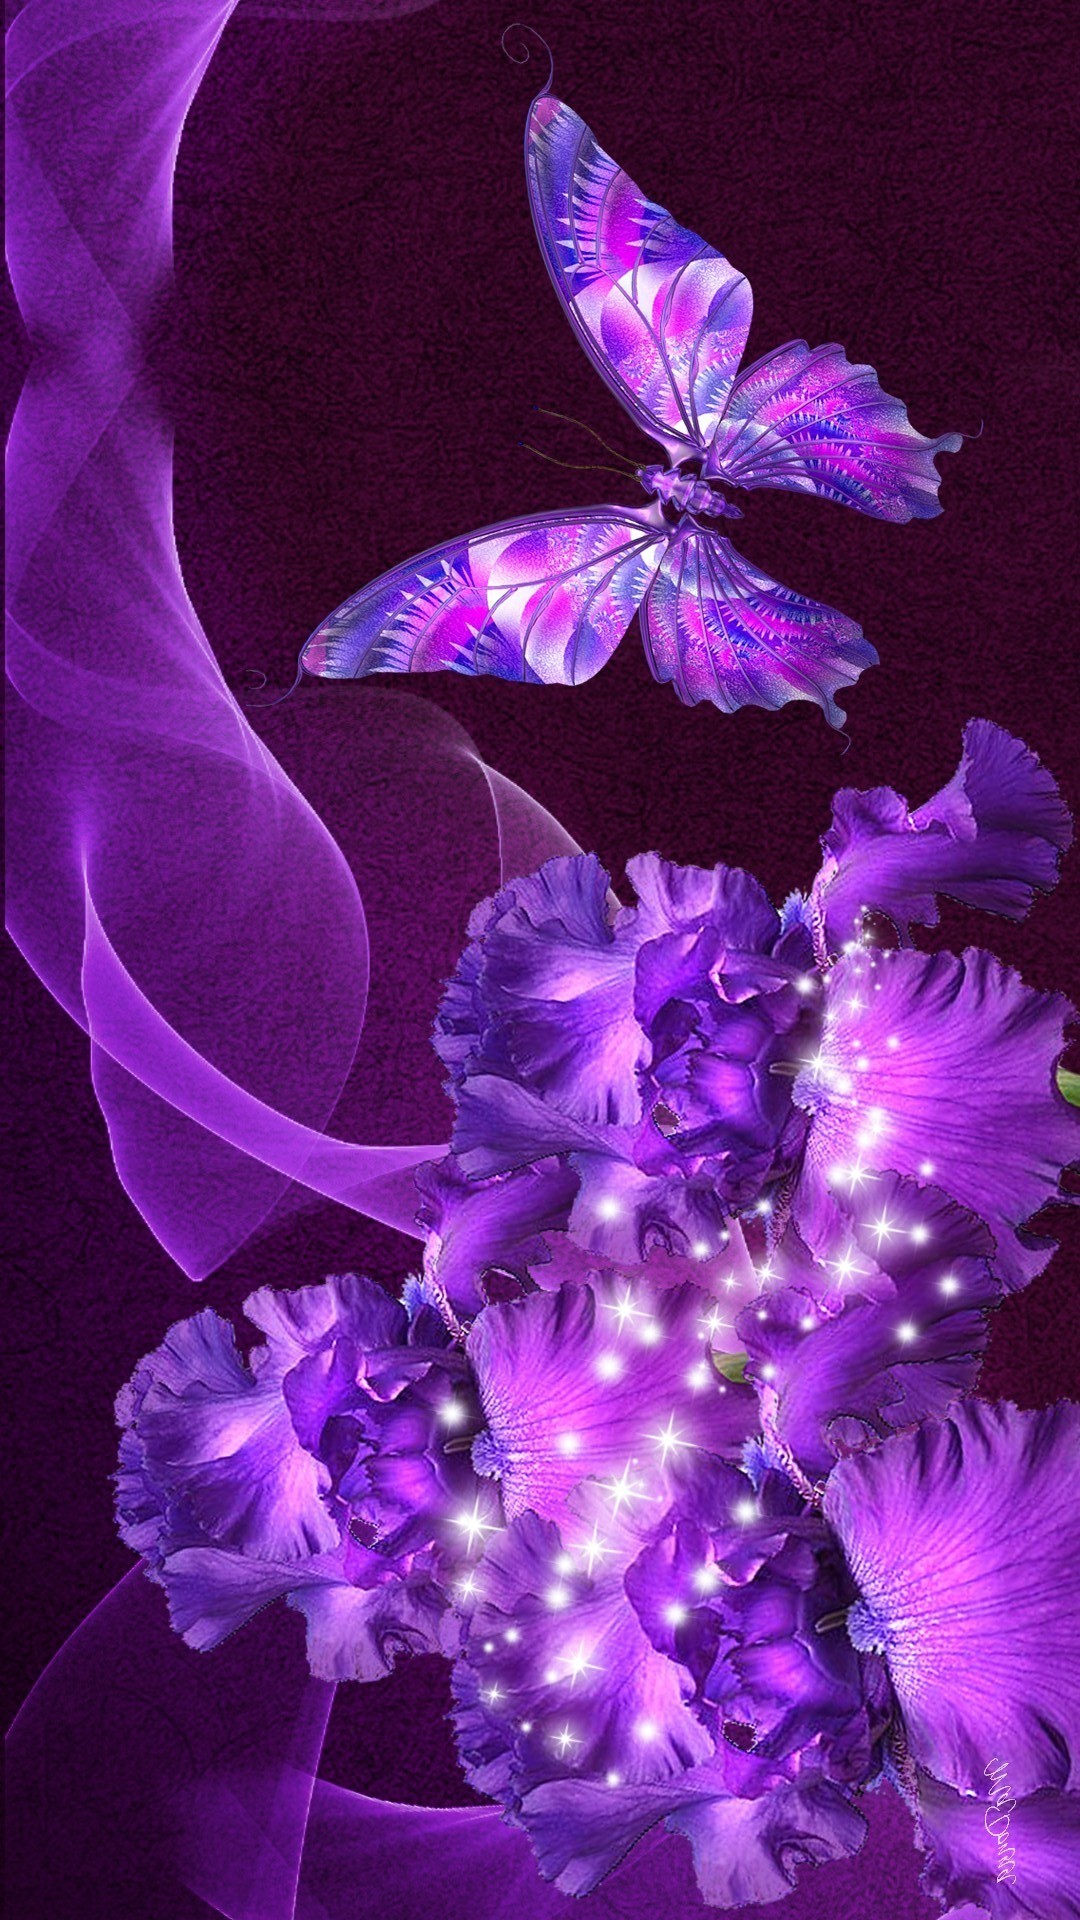 Download 39+ 47+ Wallpaper Purple Butterfly Images Gif GIF